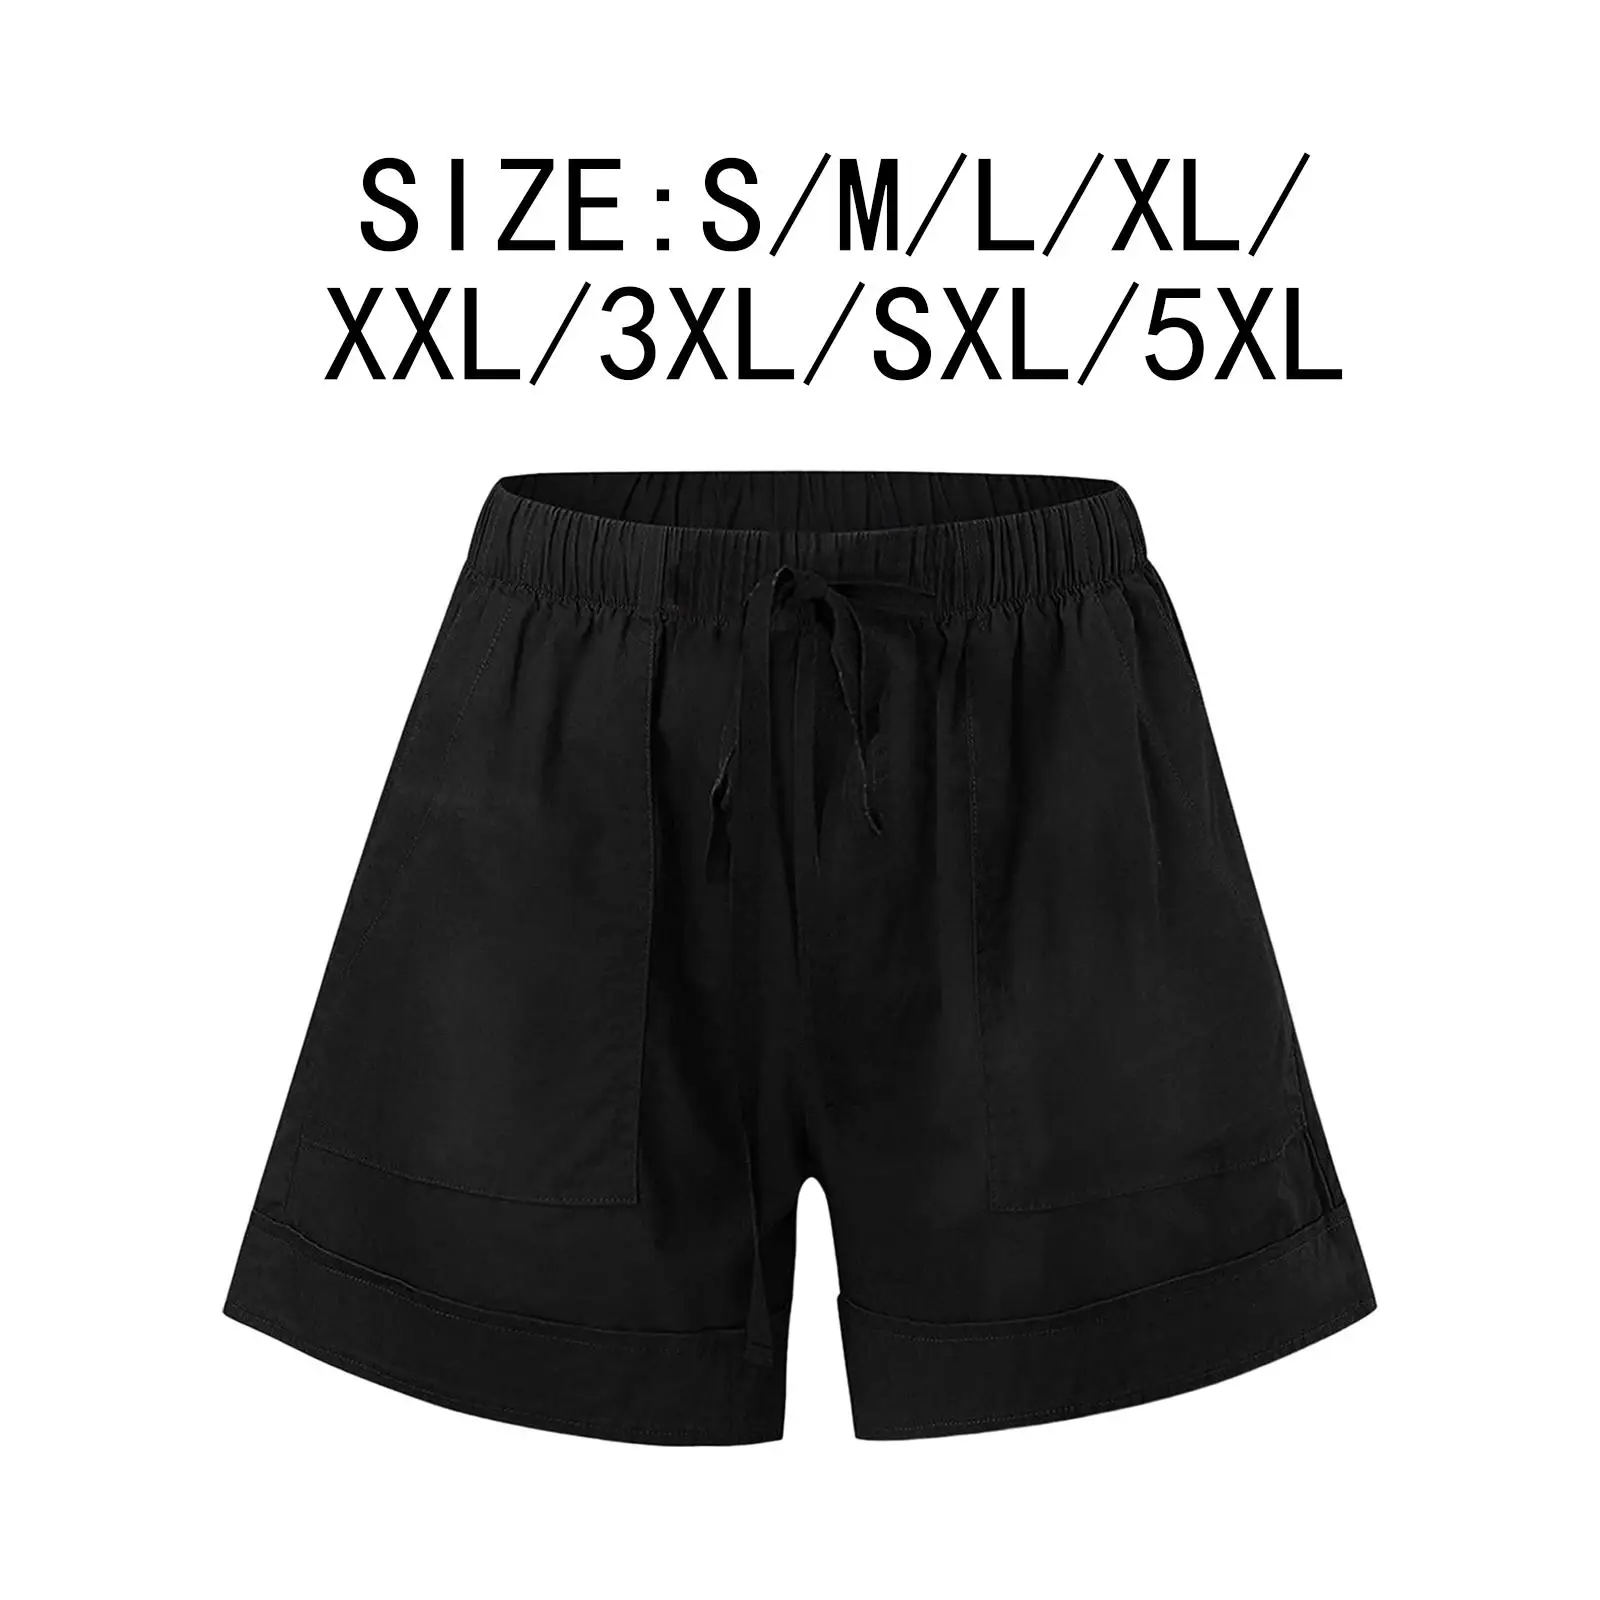 Casual Short Pants Pocketed Shorts Comfort Shorts Elastic Waist Women Drawstring Shorts with Pocket for Workout Gym Beach Summer